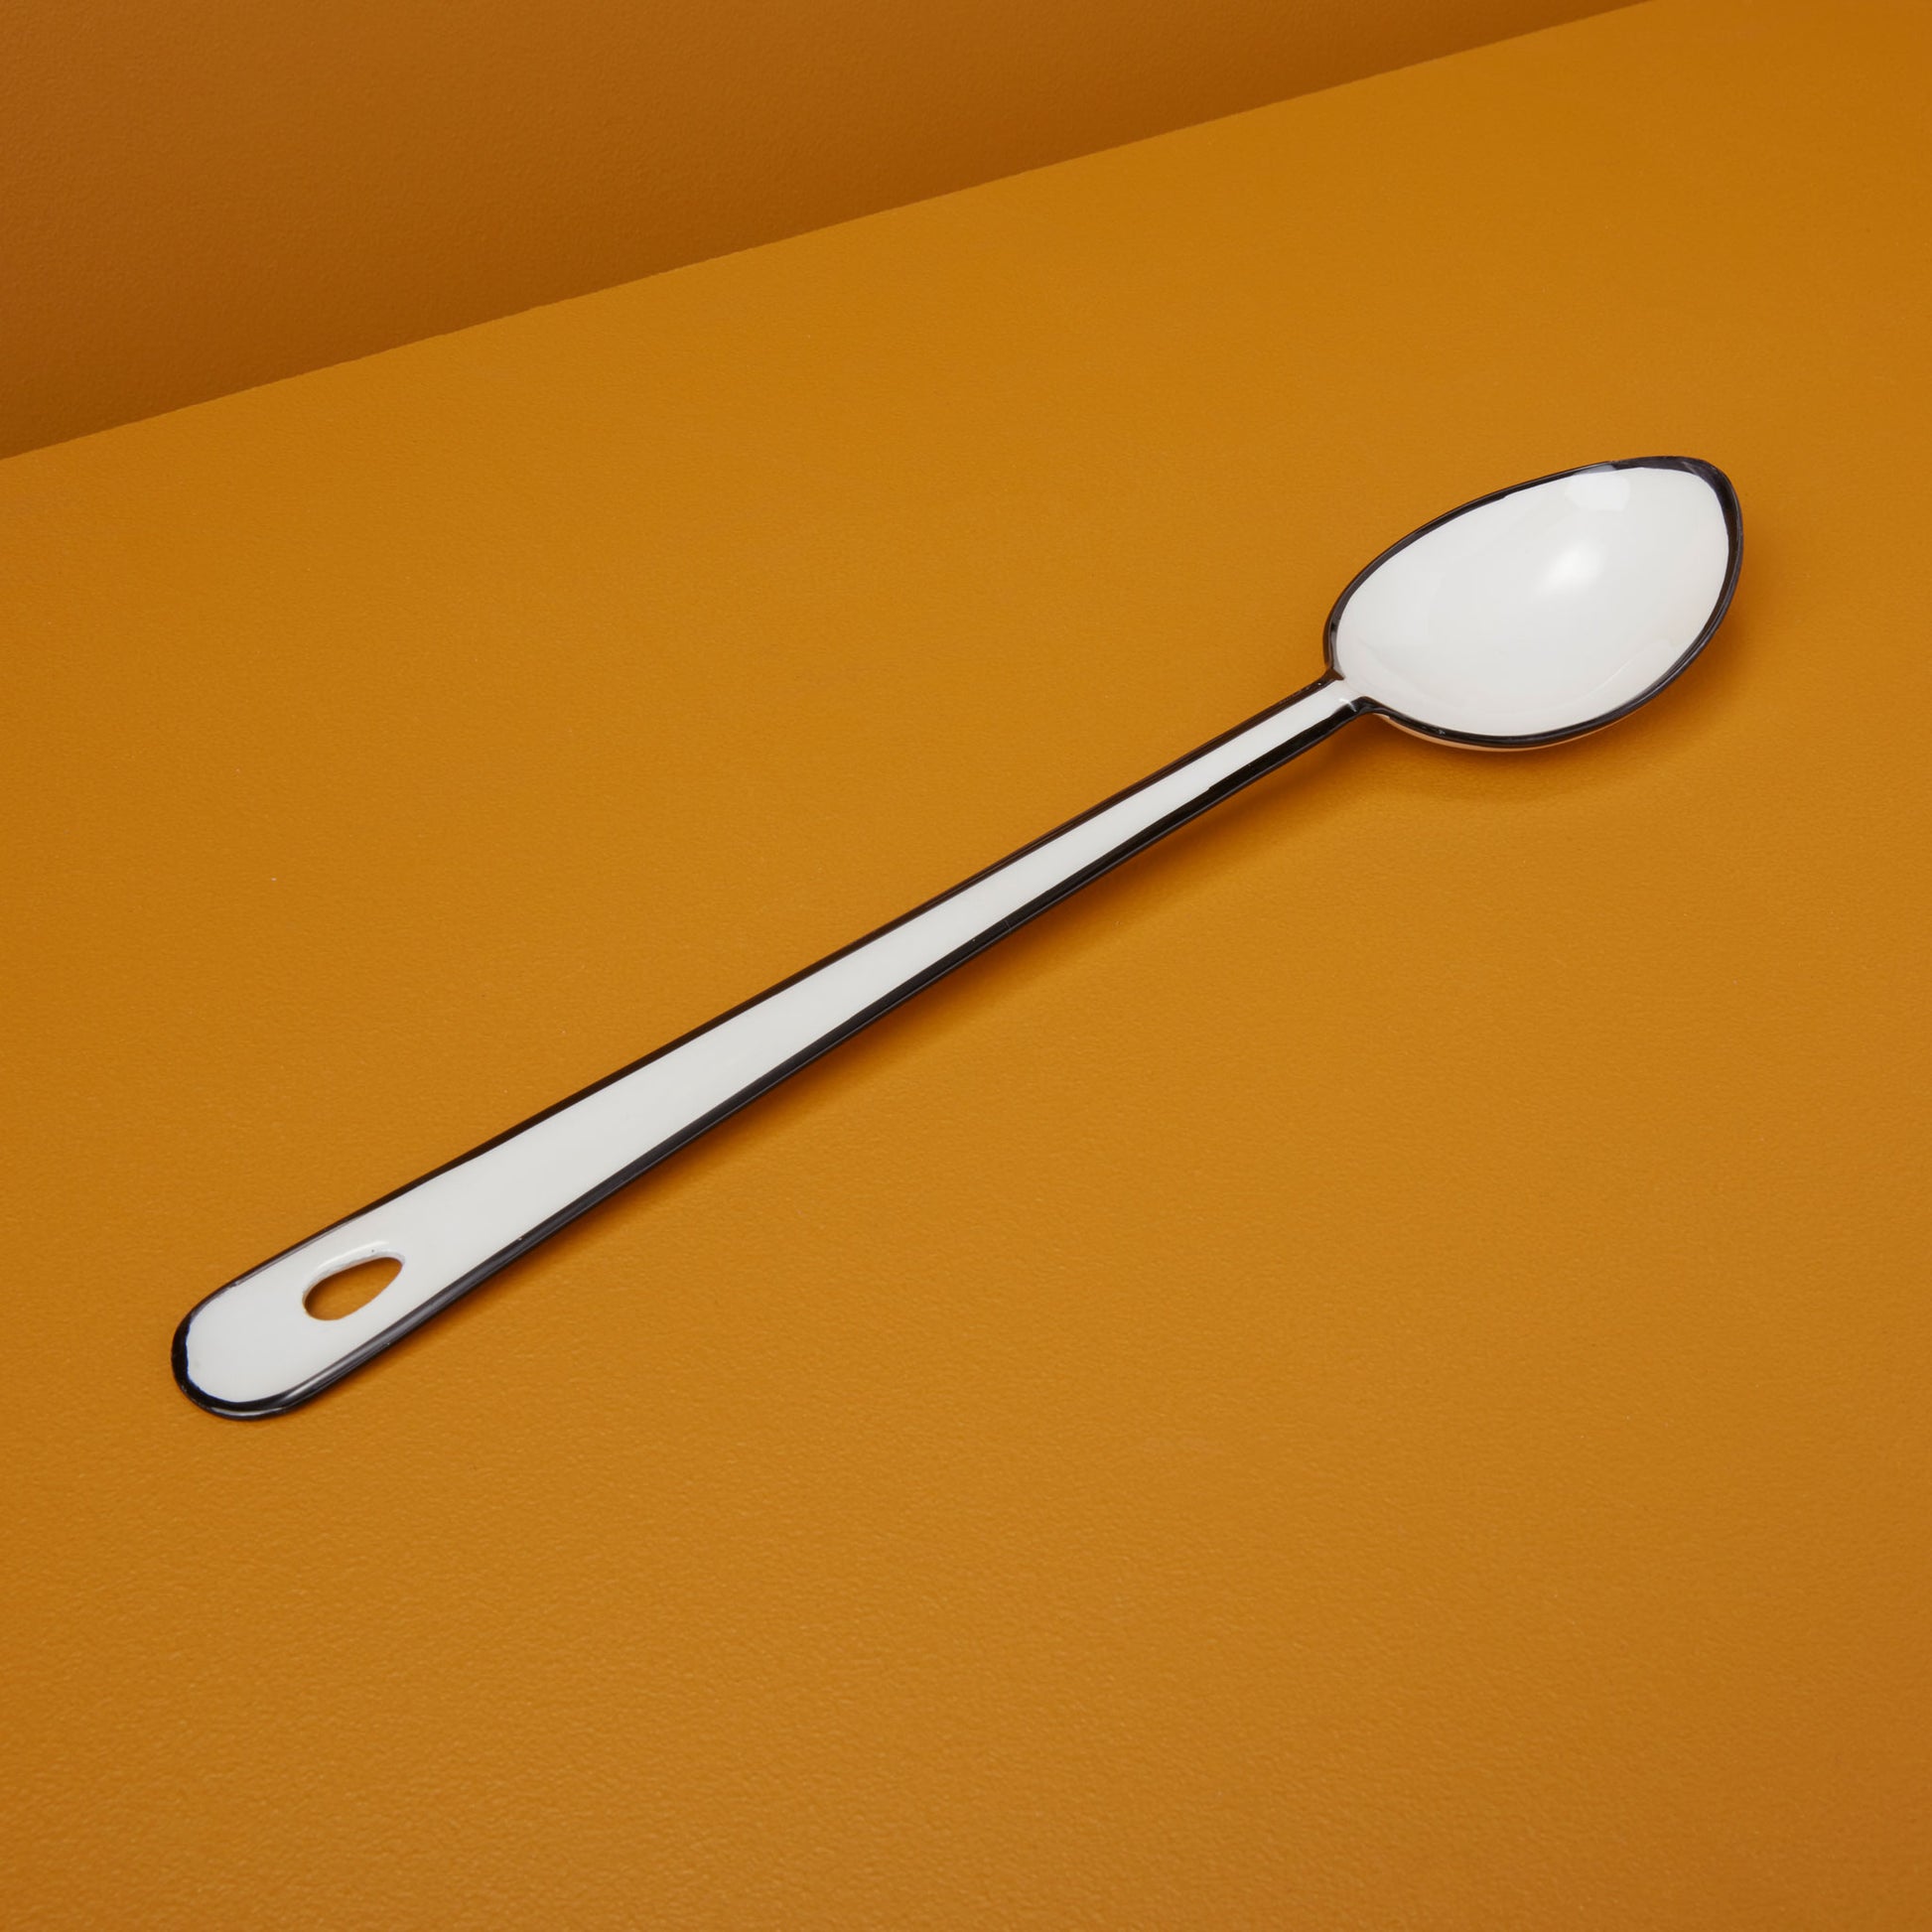 Harvest Mixing Spoon: Durable harvest mixing spoon from Grace Blu Shoppe, perfect for stirring up your favorite dishes.